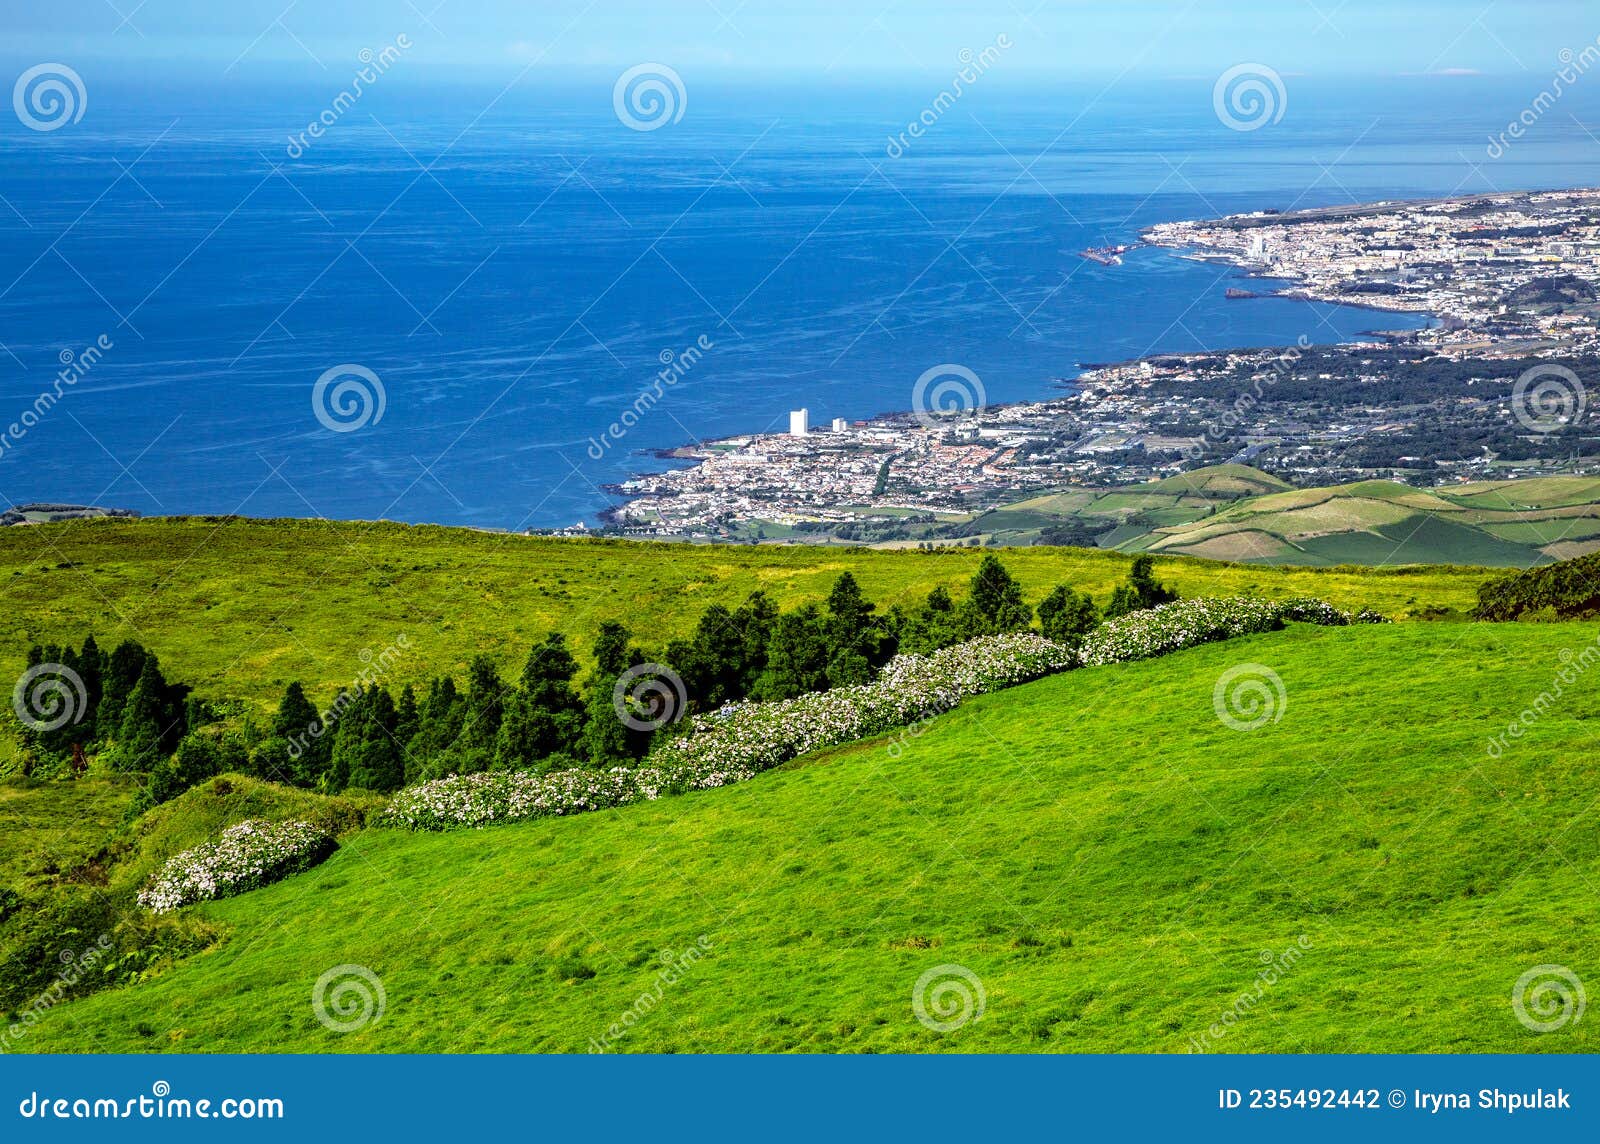 view over the south coast to the west, sÃÂ£o miguel island, azores, aÃÂ§ores, portugal, europe